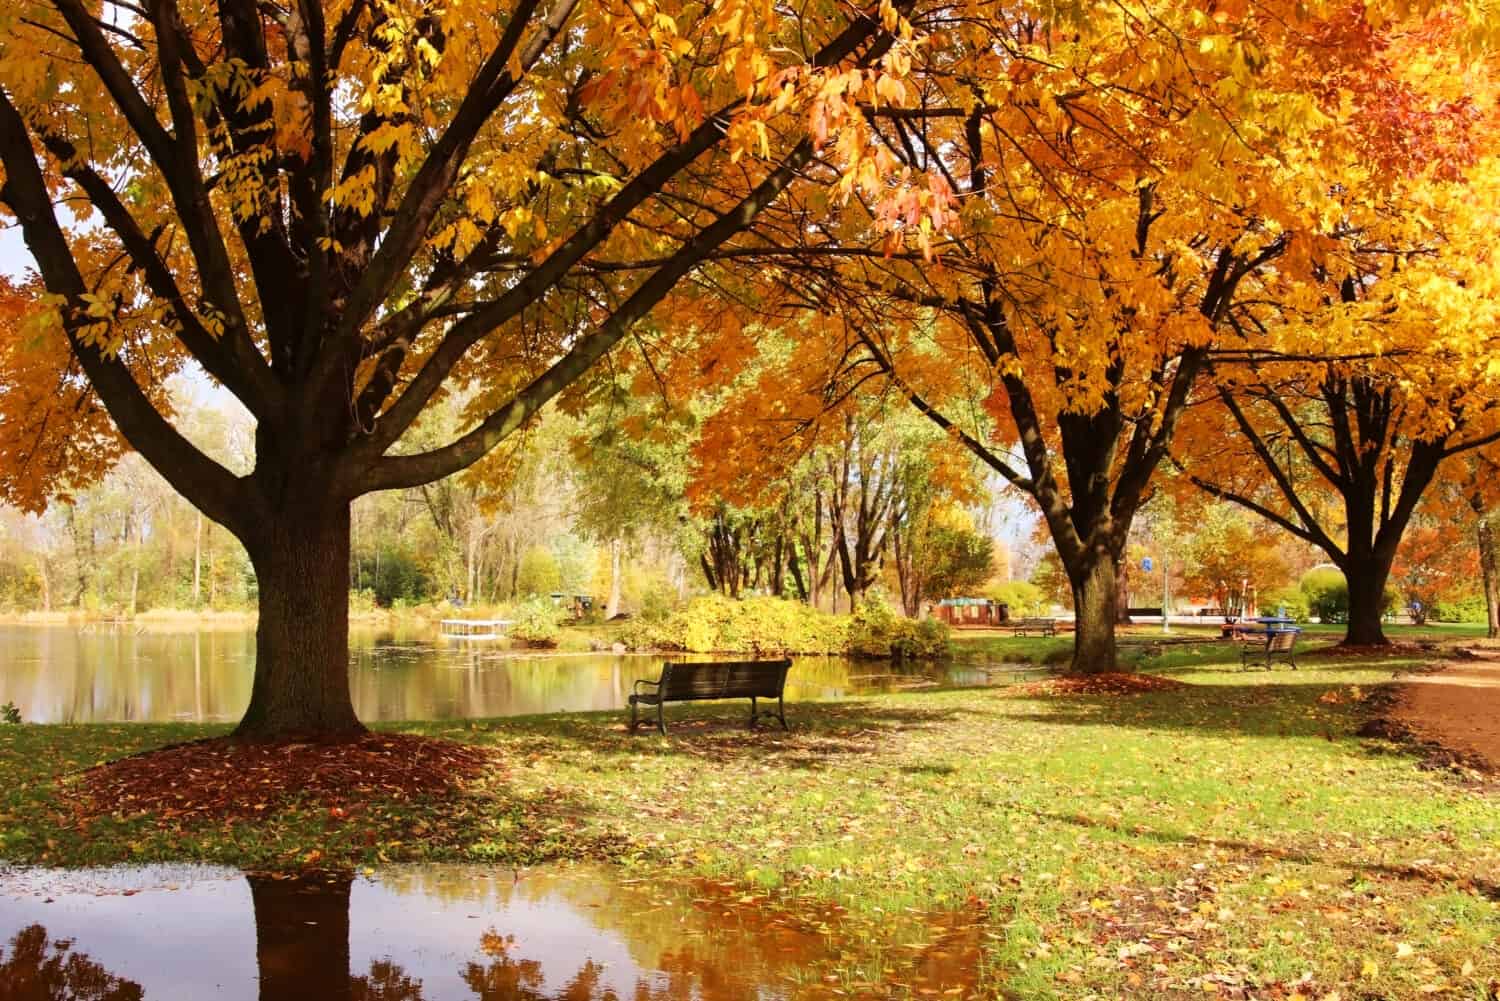 Beautiful colorful autumn nature background. Beautiful autumn landscape with colorful trees around the pond and bench in a city park. Lakeview park, Middleton, Madison area, WI, USA.